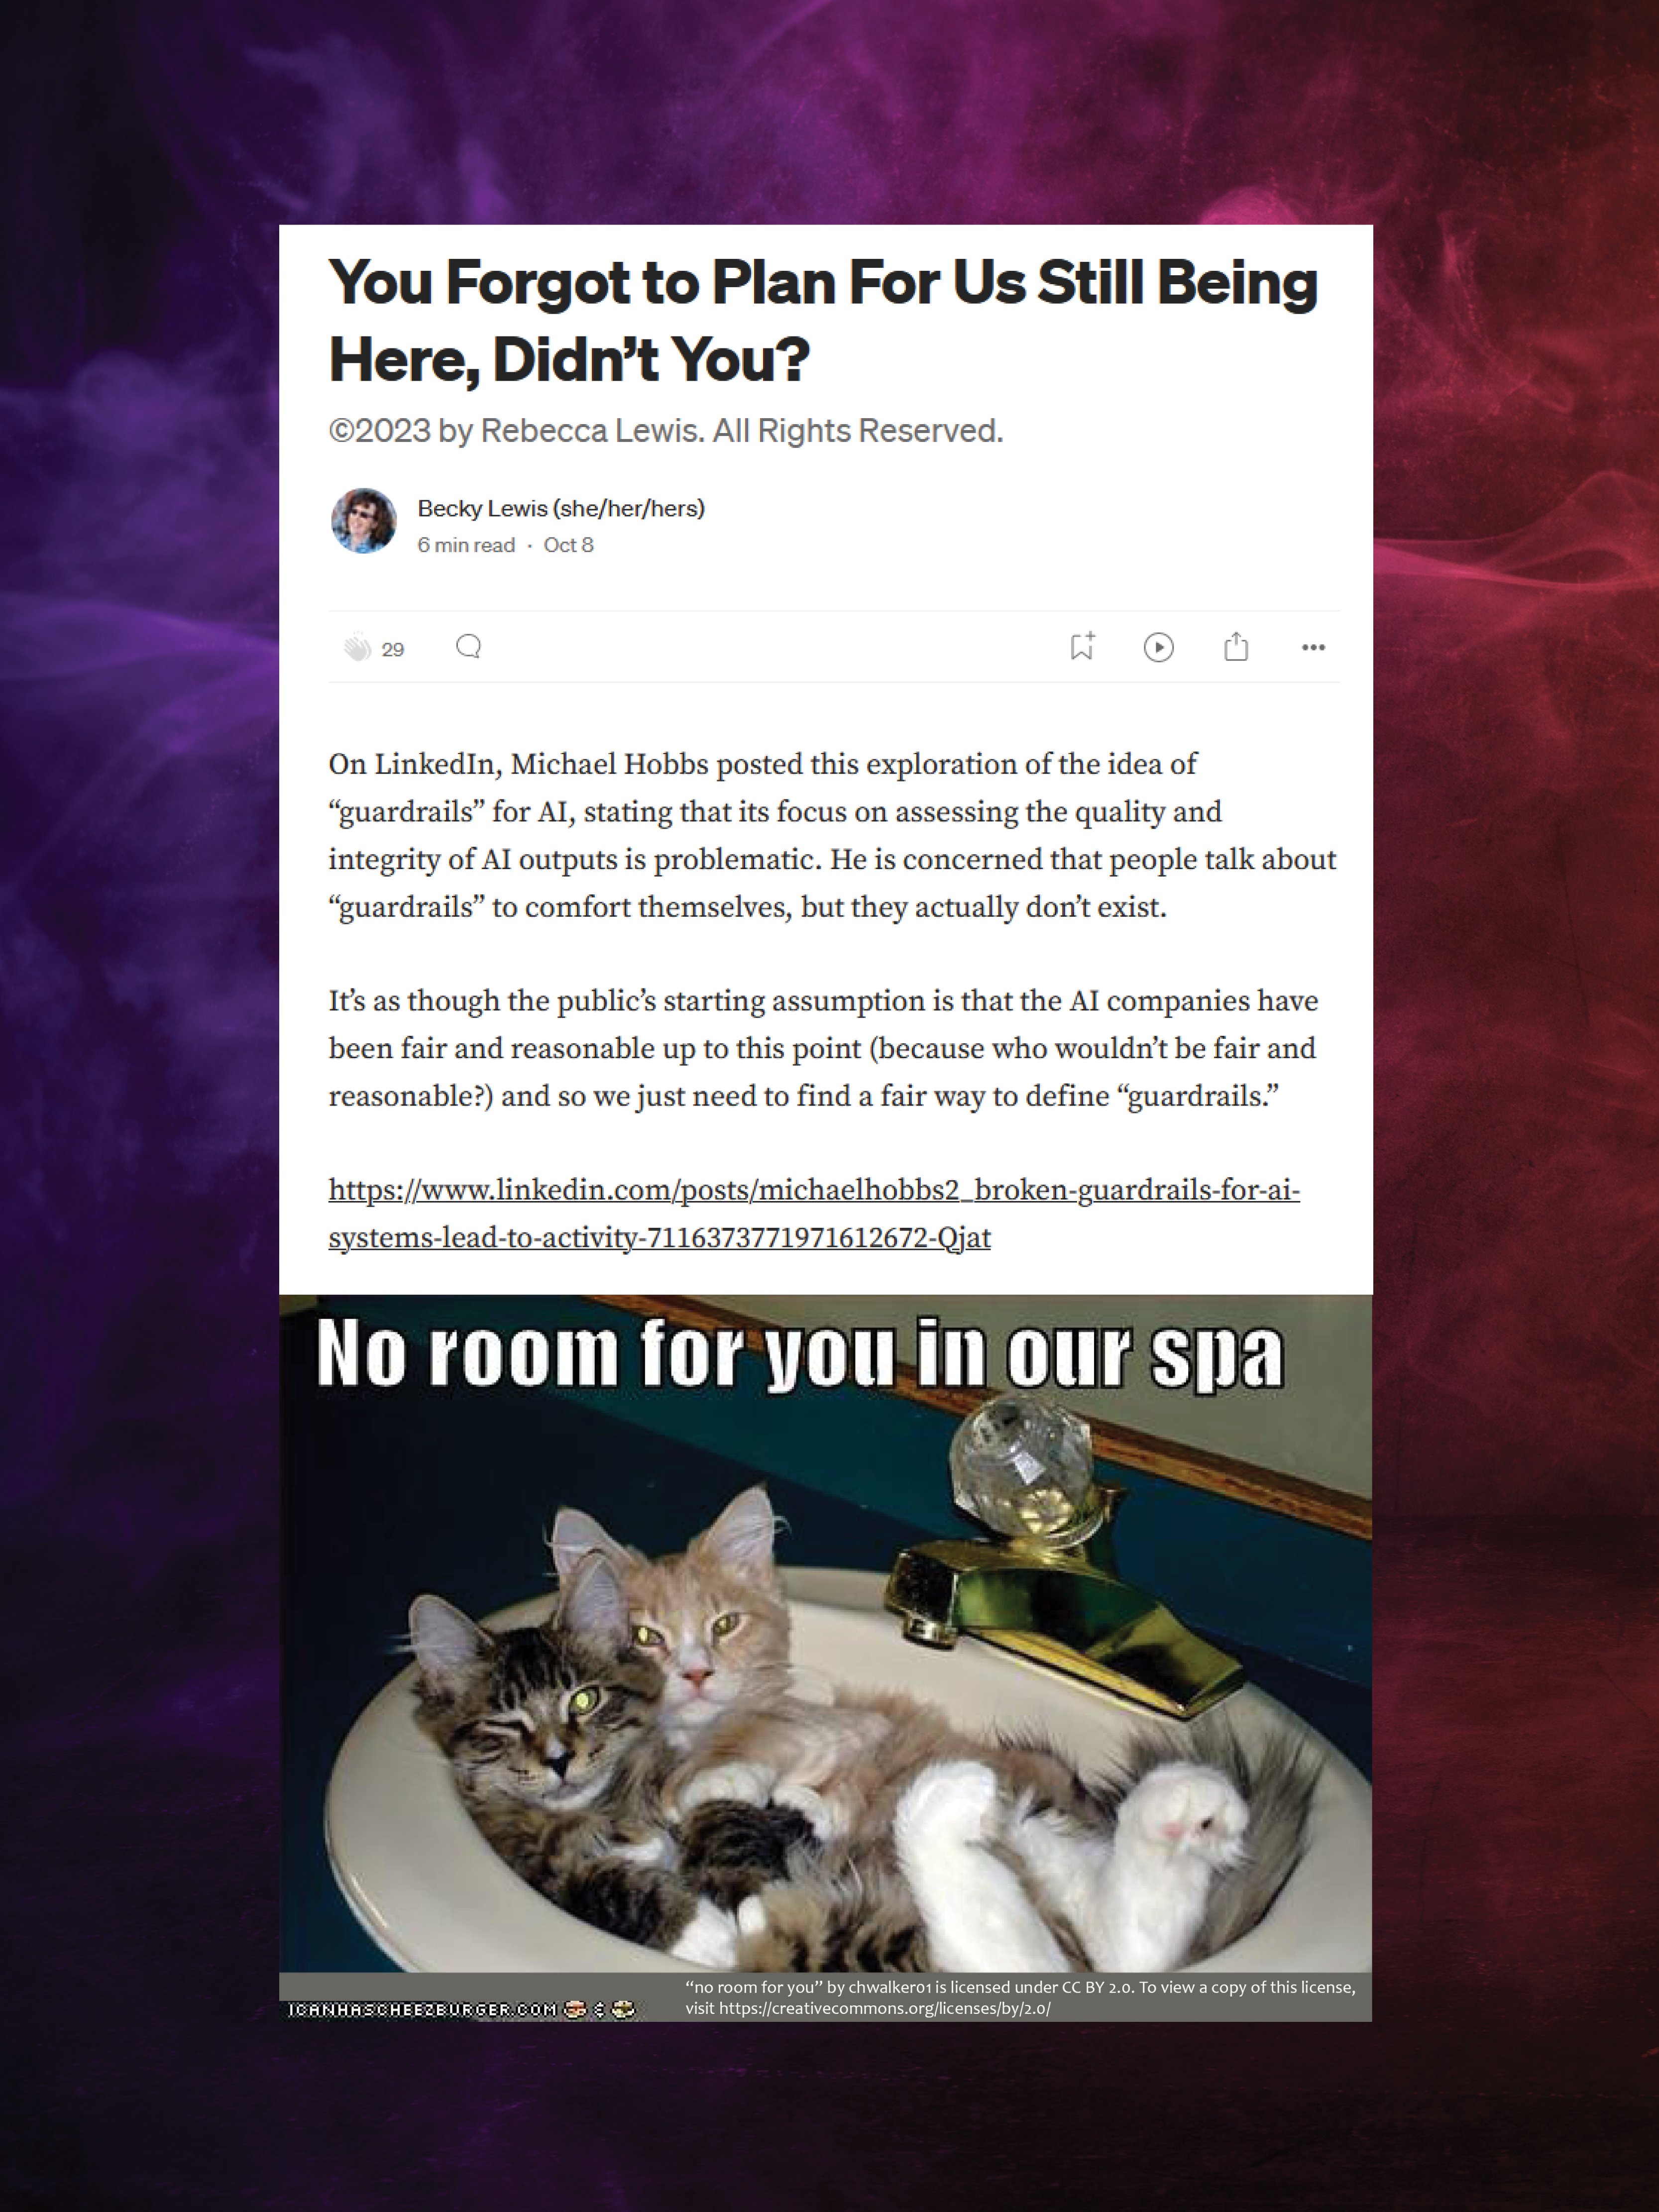 Preview of the Medium.com article, including a photo of two wide-eyed kittens who have wedged themselves, side-by-side, into a bathroom sink, on their backs with their paws in the air. White meme text reads, 'No room for you in our spa.'